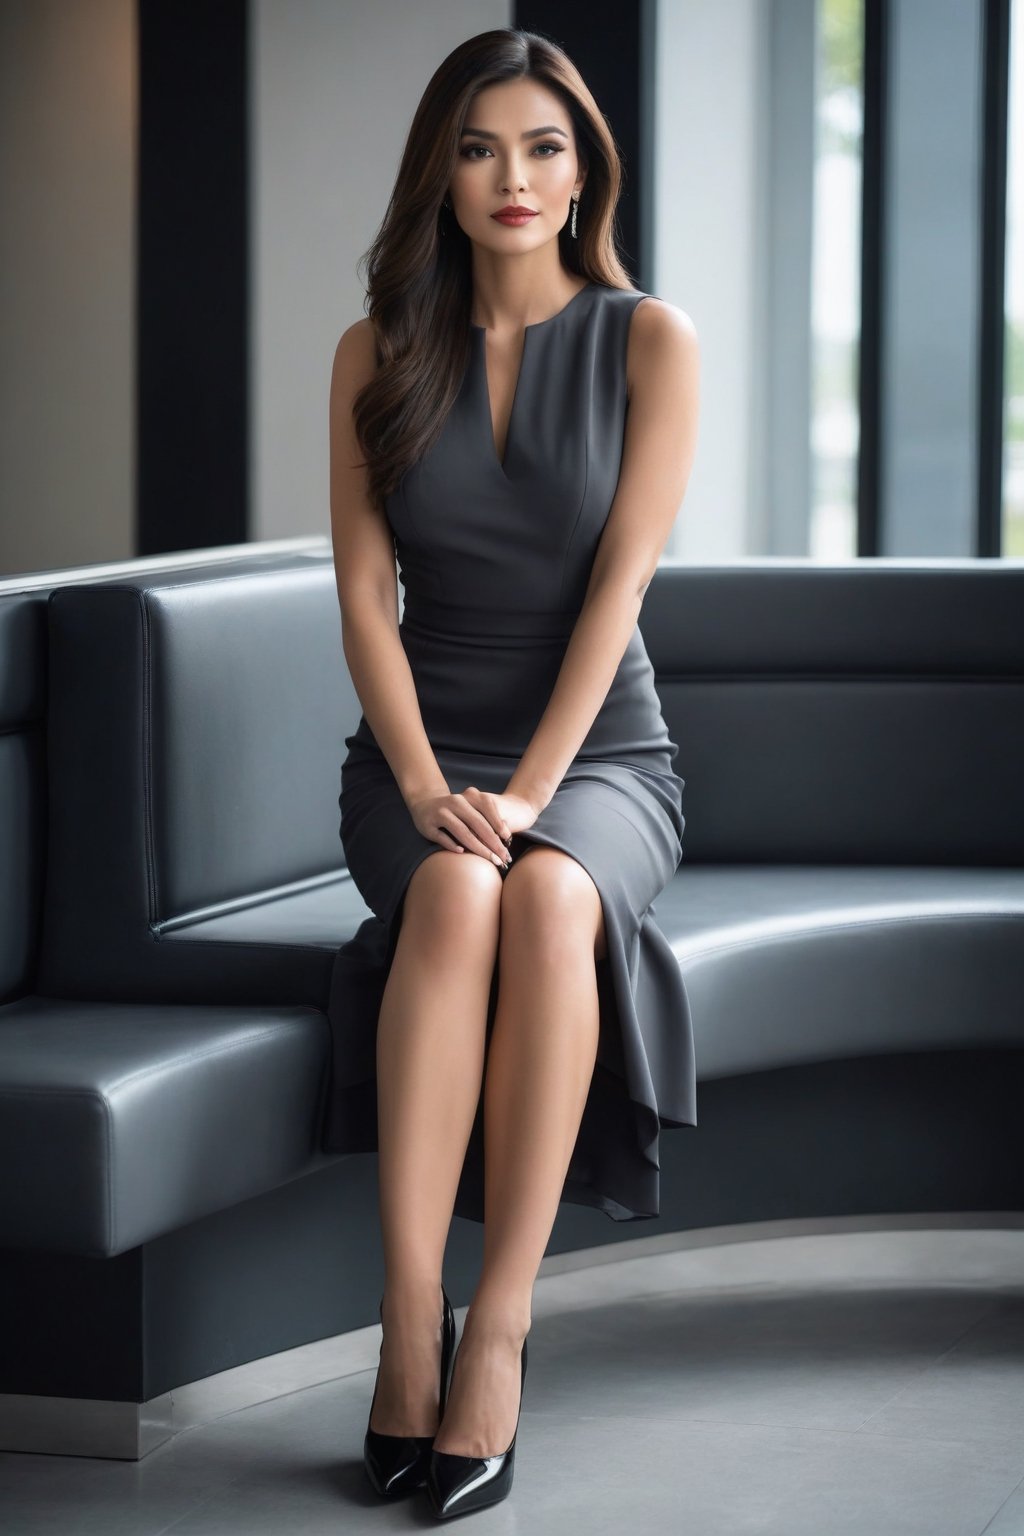 A stylish woman sitting on a white seat with her legs crossed, and one hand gently touching her chin. She is wearing a dark grey dress and black high heels. Her long, straight hair is flowing over her shoulders. She has a confident look and is gazing into the camera.